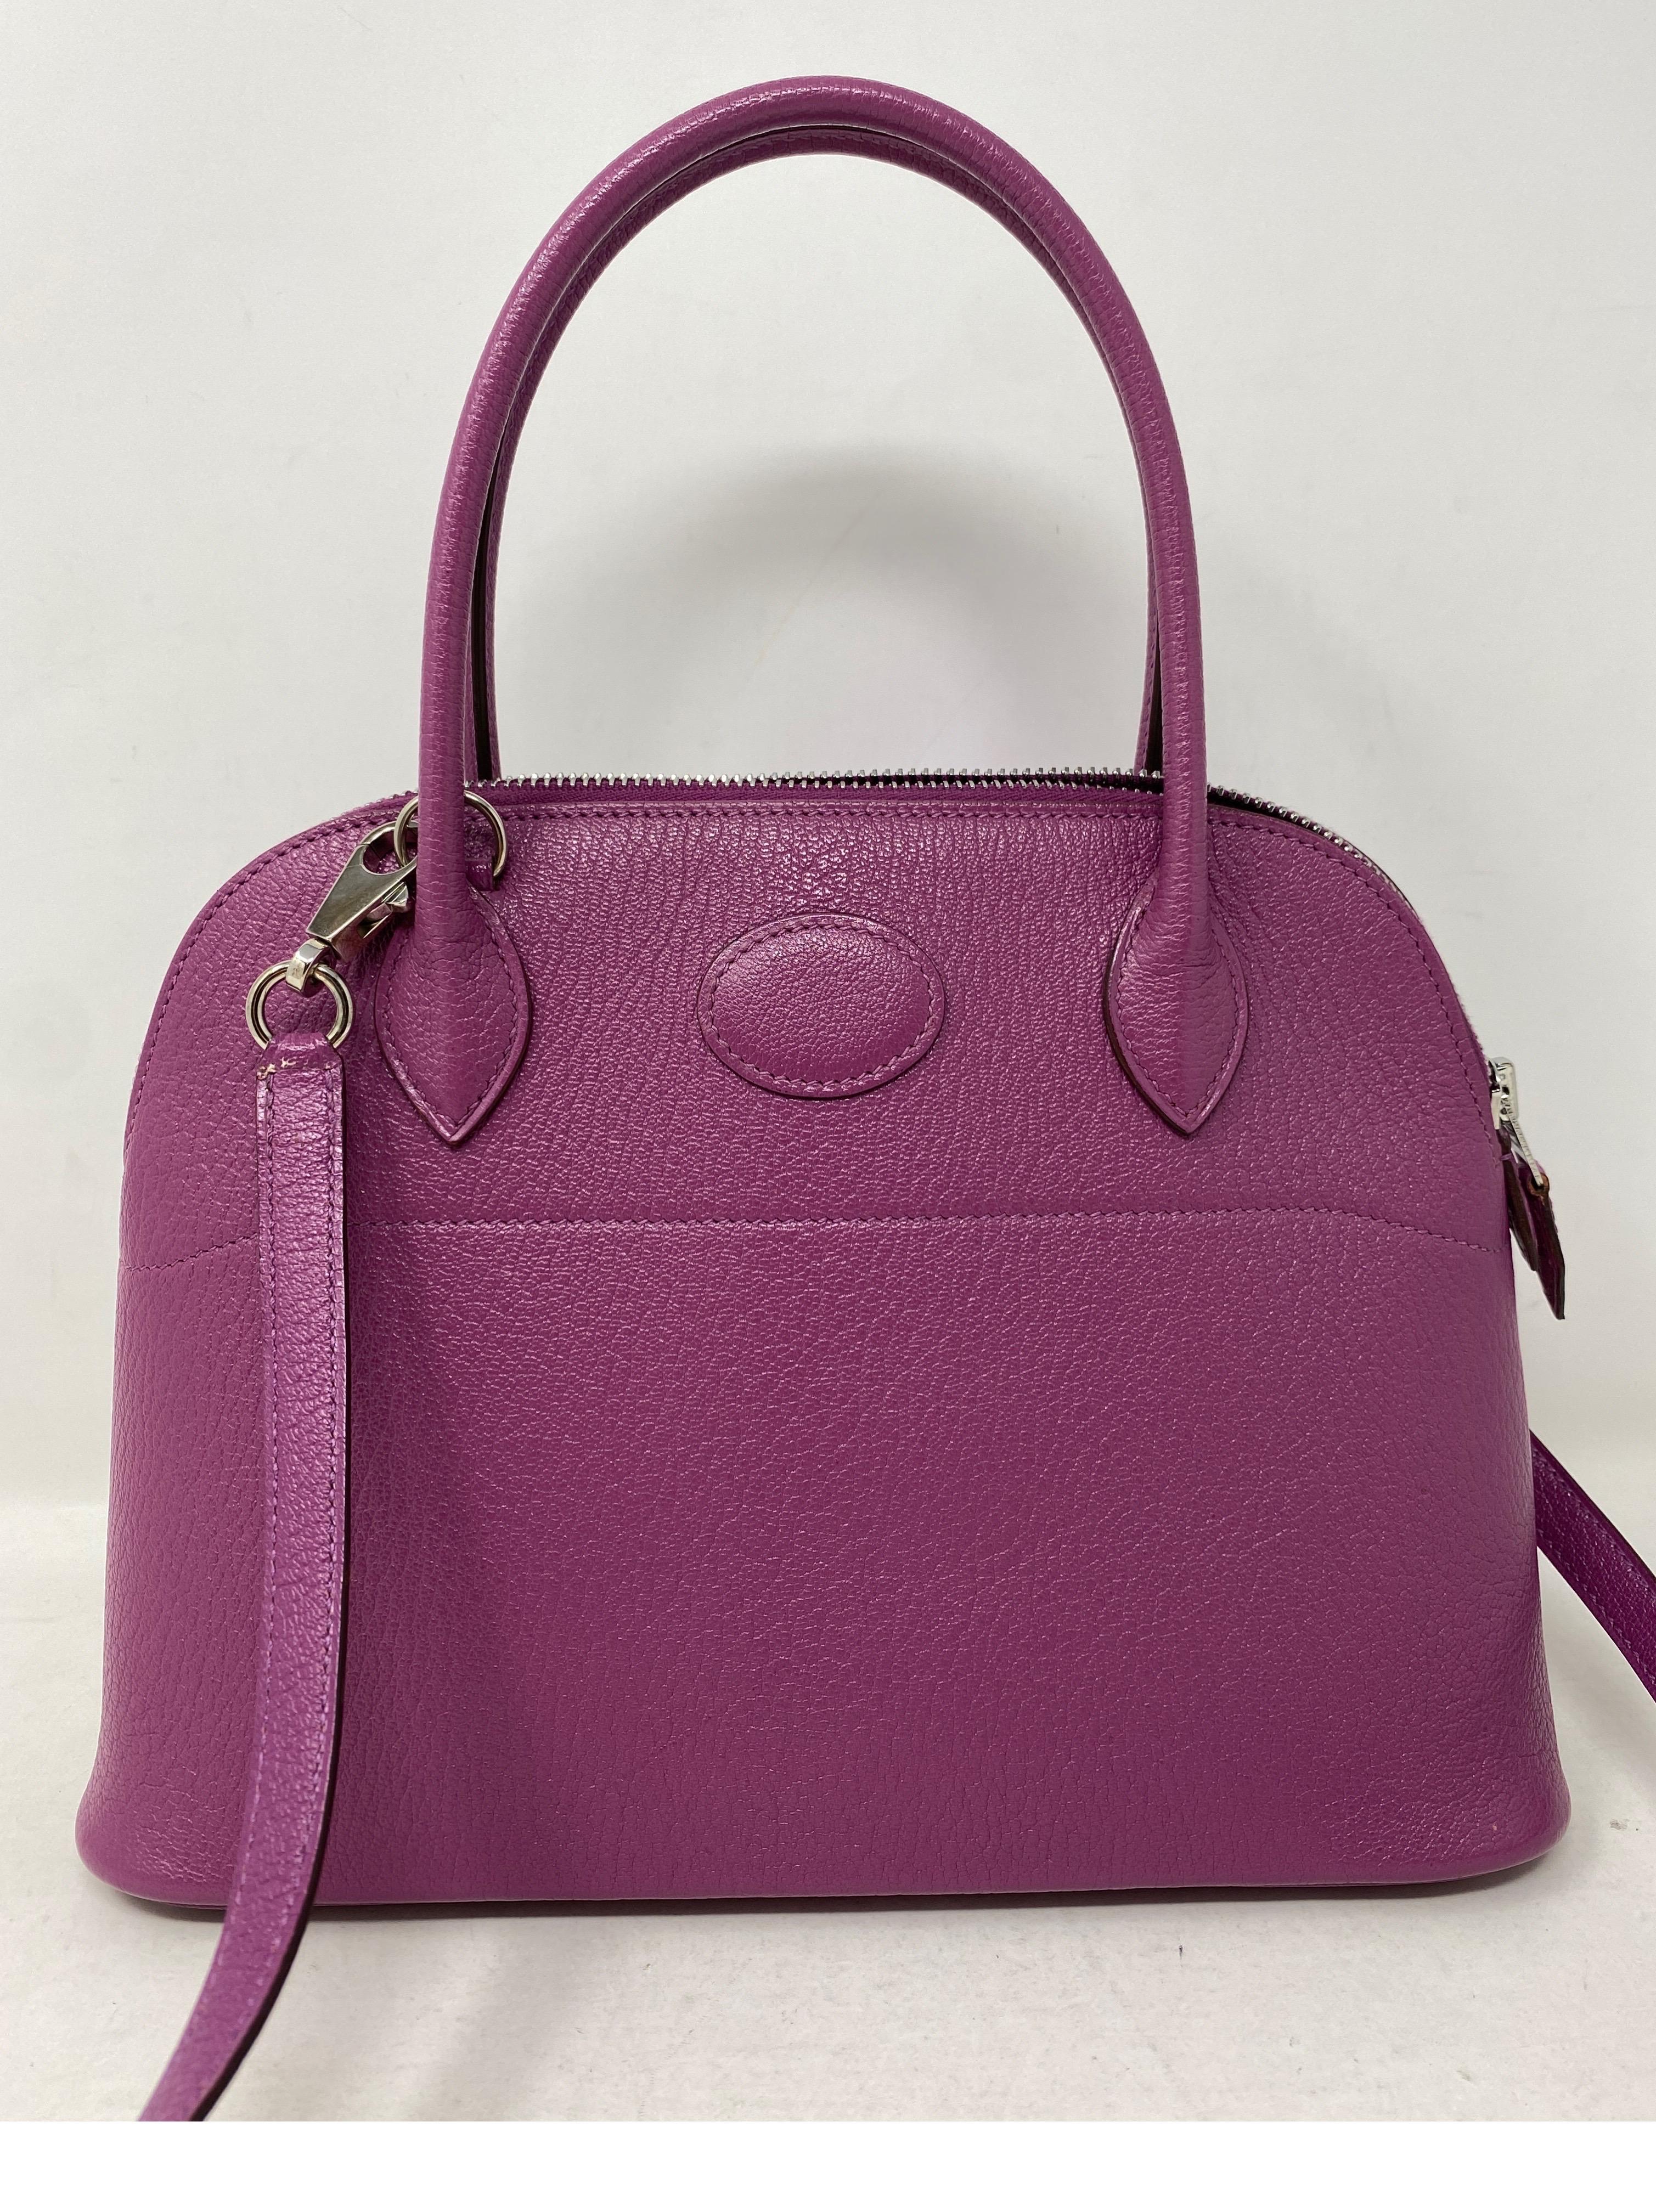 Hermes Bolide 27 Purple Mini Size Bag. Mint like new condition. Cutest small size bag with strap. Fits a phone and wallet, keys, etc. Can be worn as a shoulder bag or top handle bag. Palladium hardware. Includes dust cover. Guaranteed authentic. 